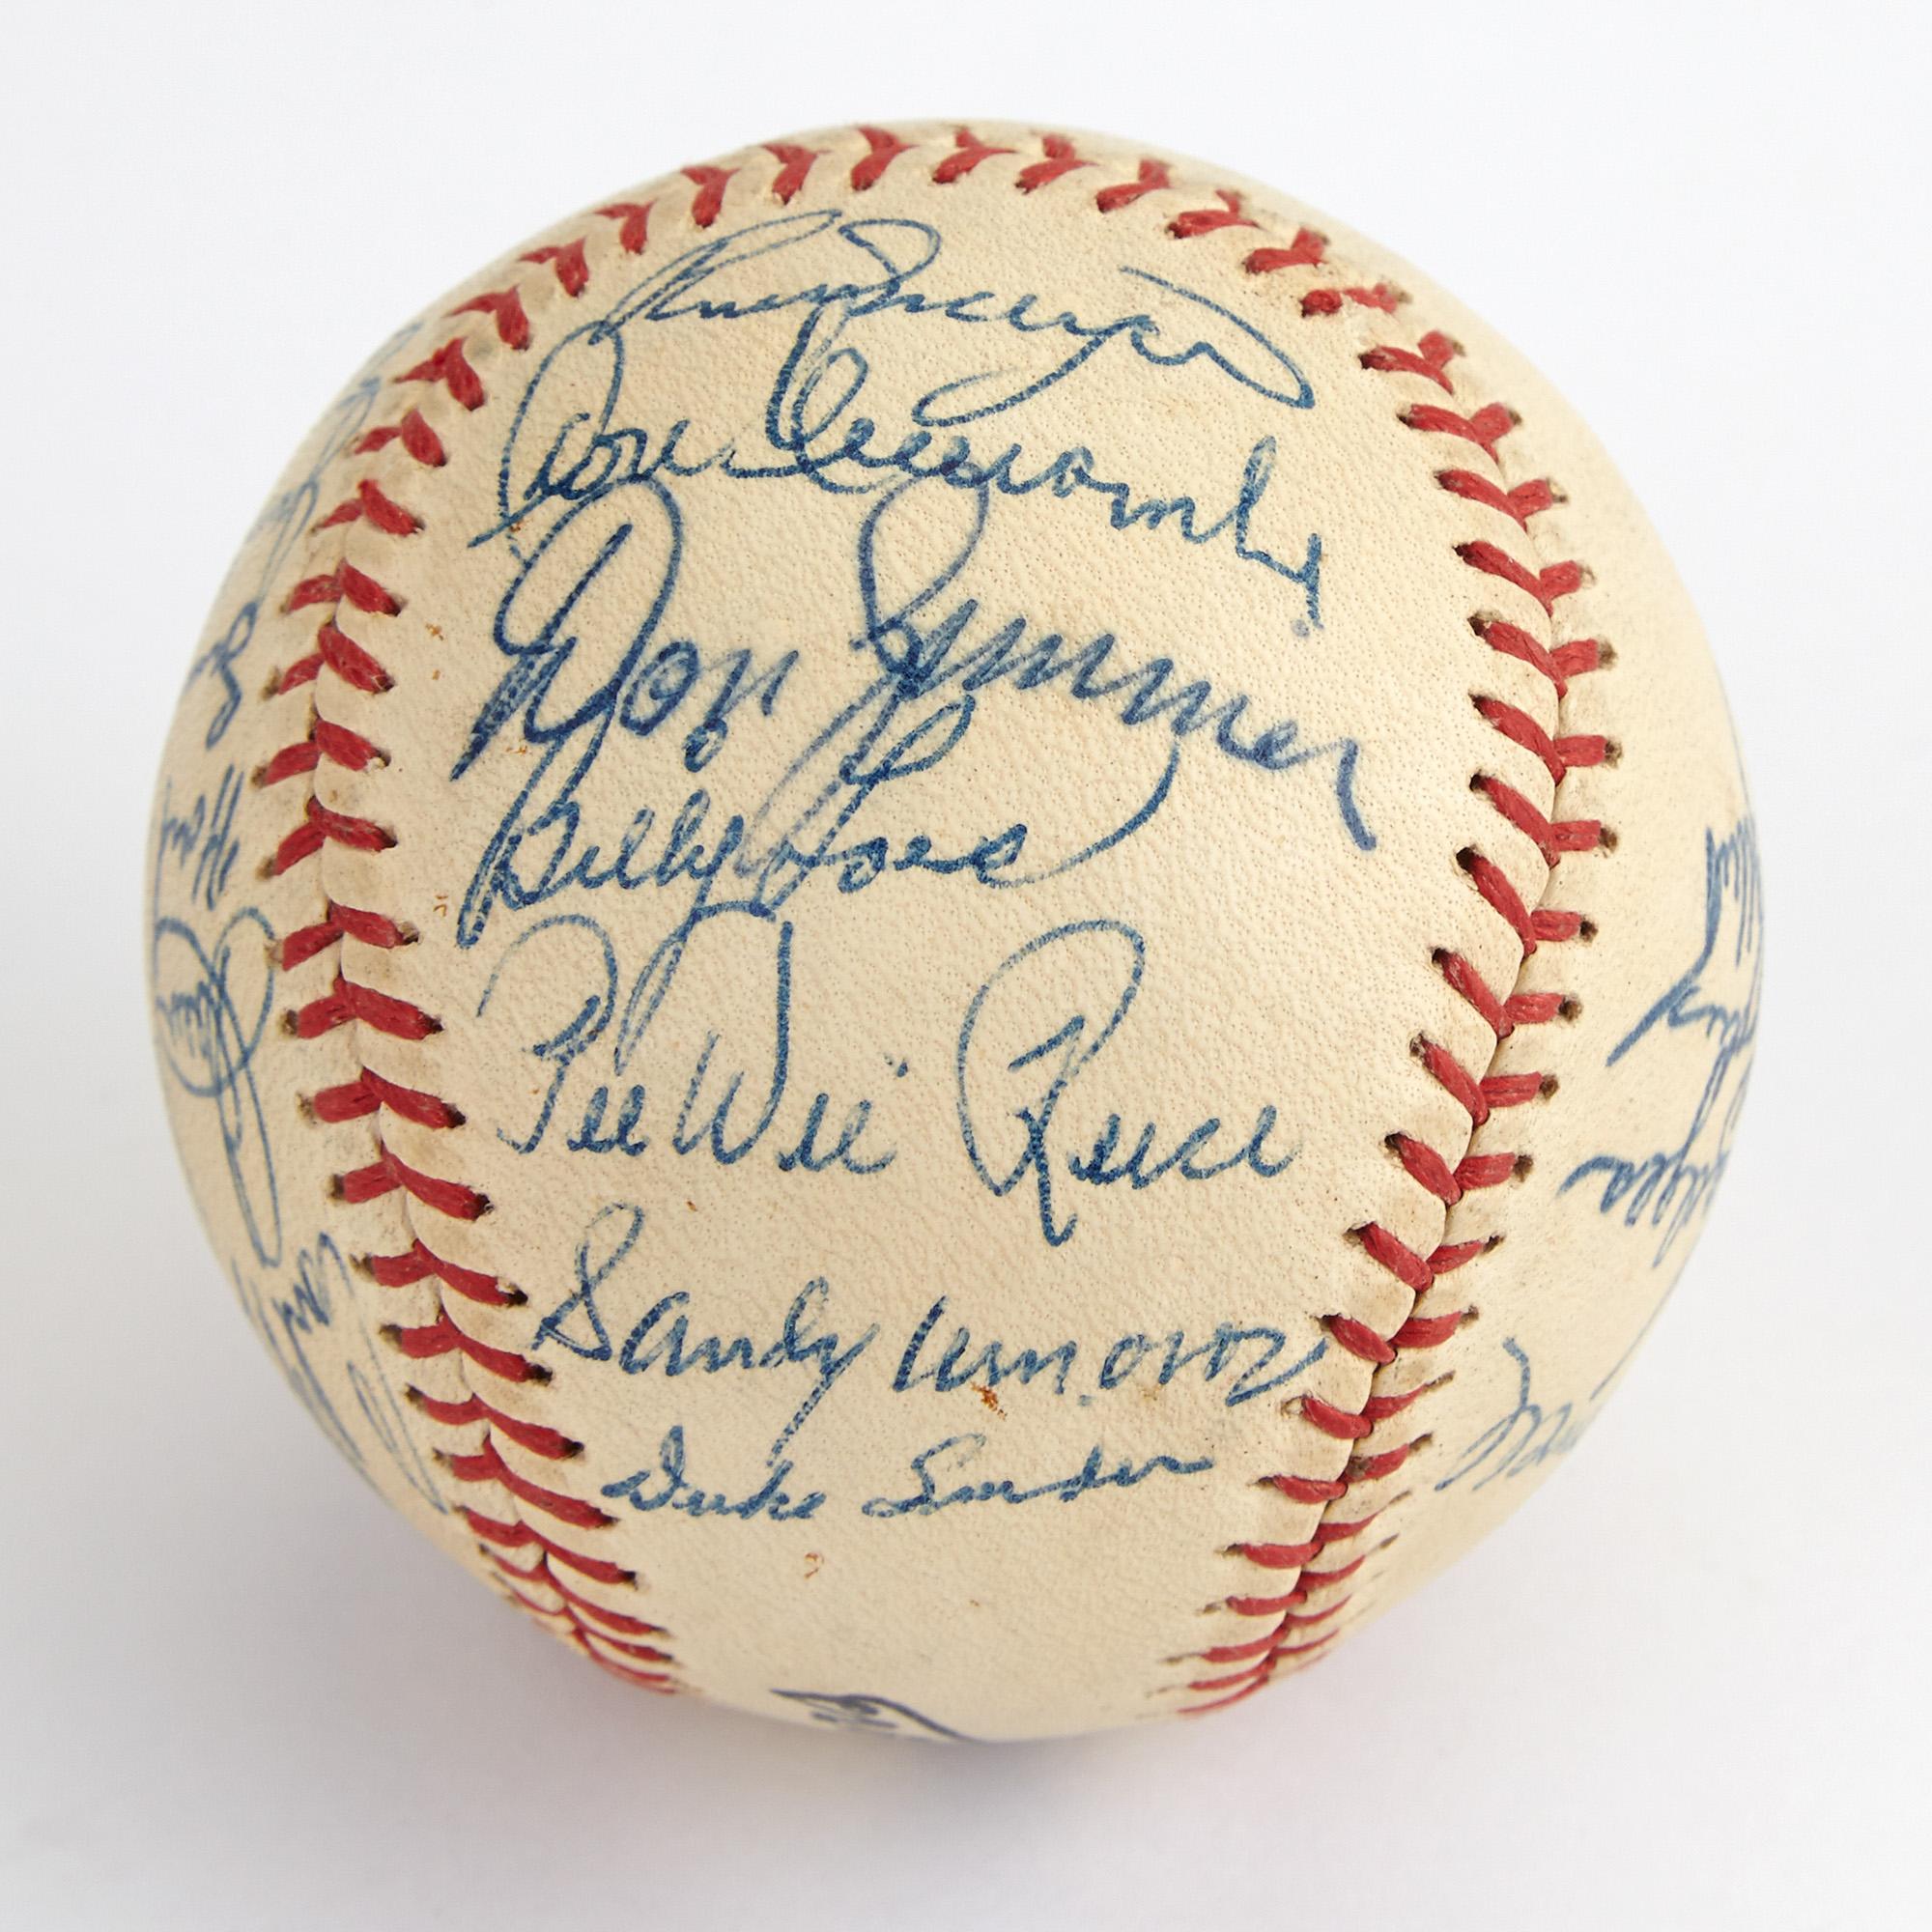 Sold at Auction: Jackie Robinson Red Stitched Signed Baseball